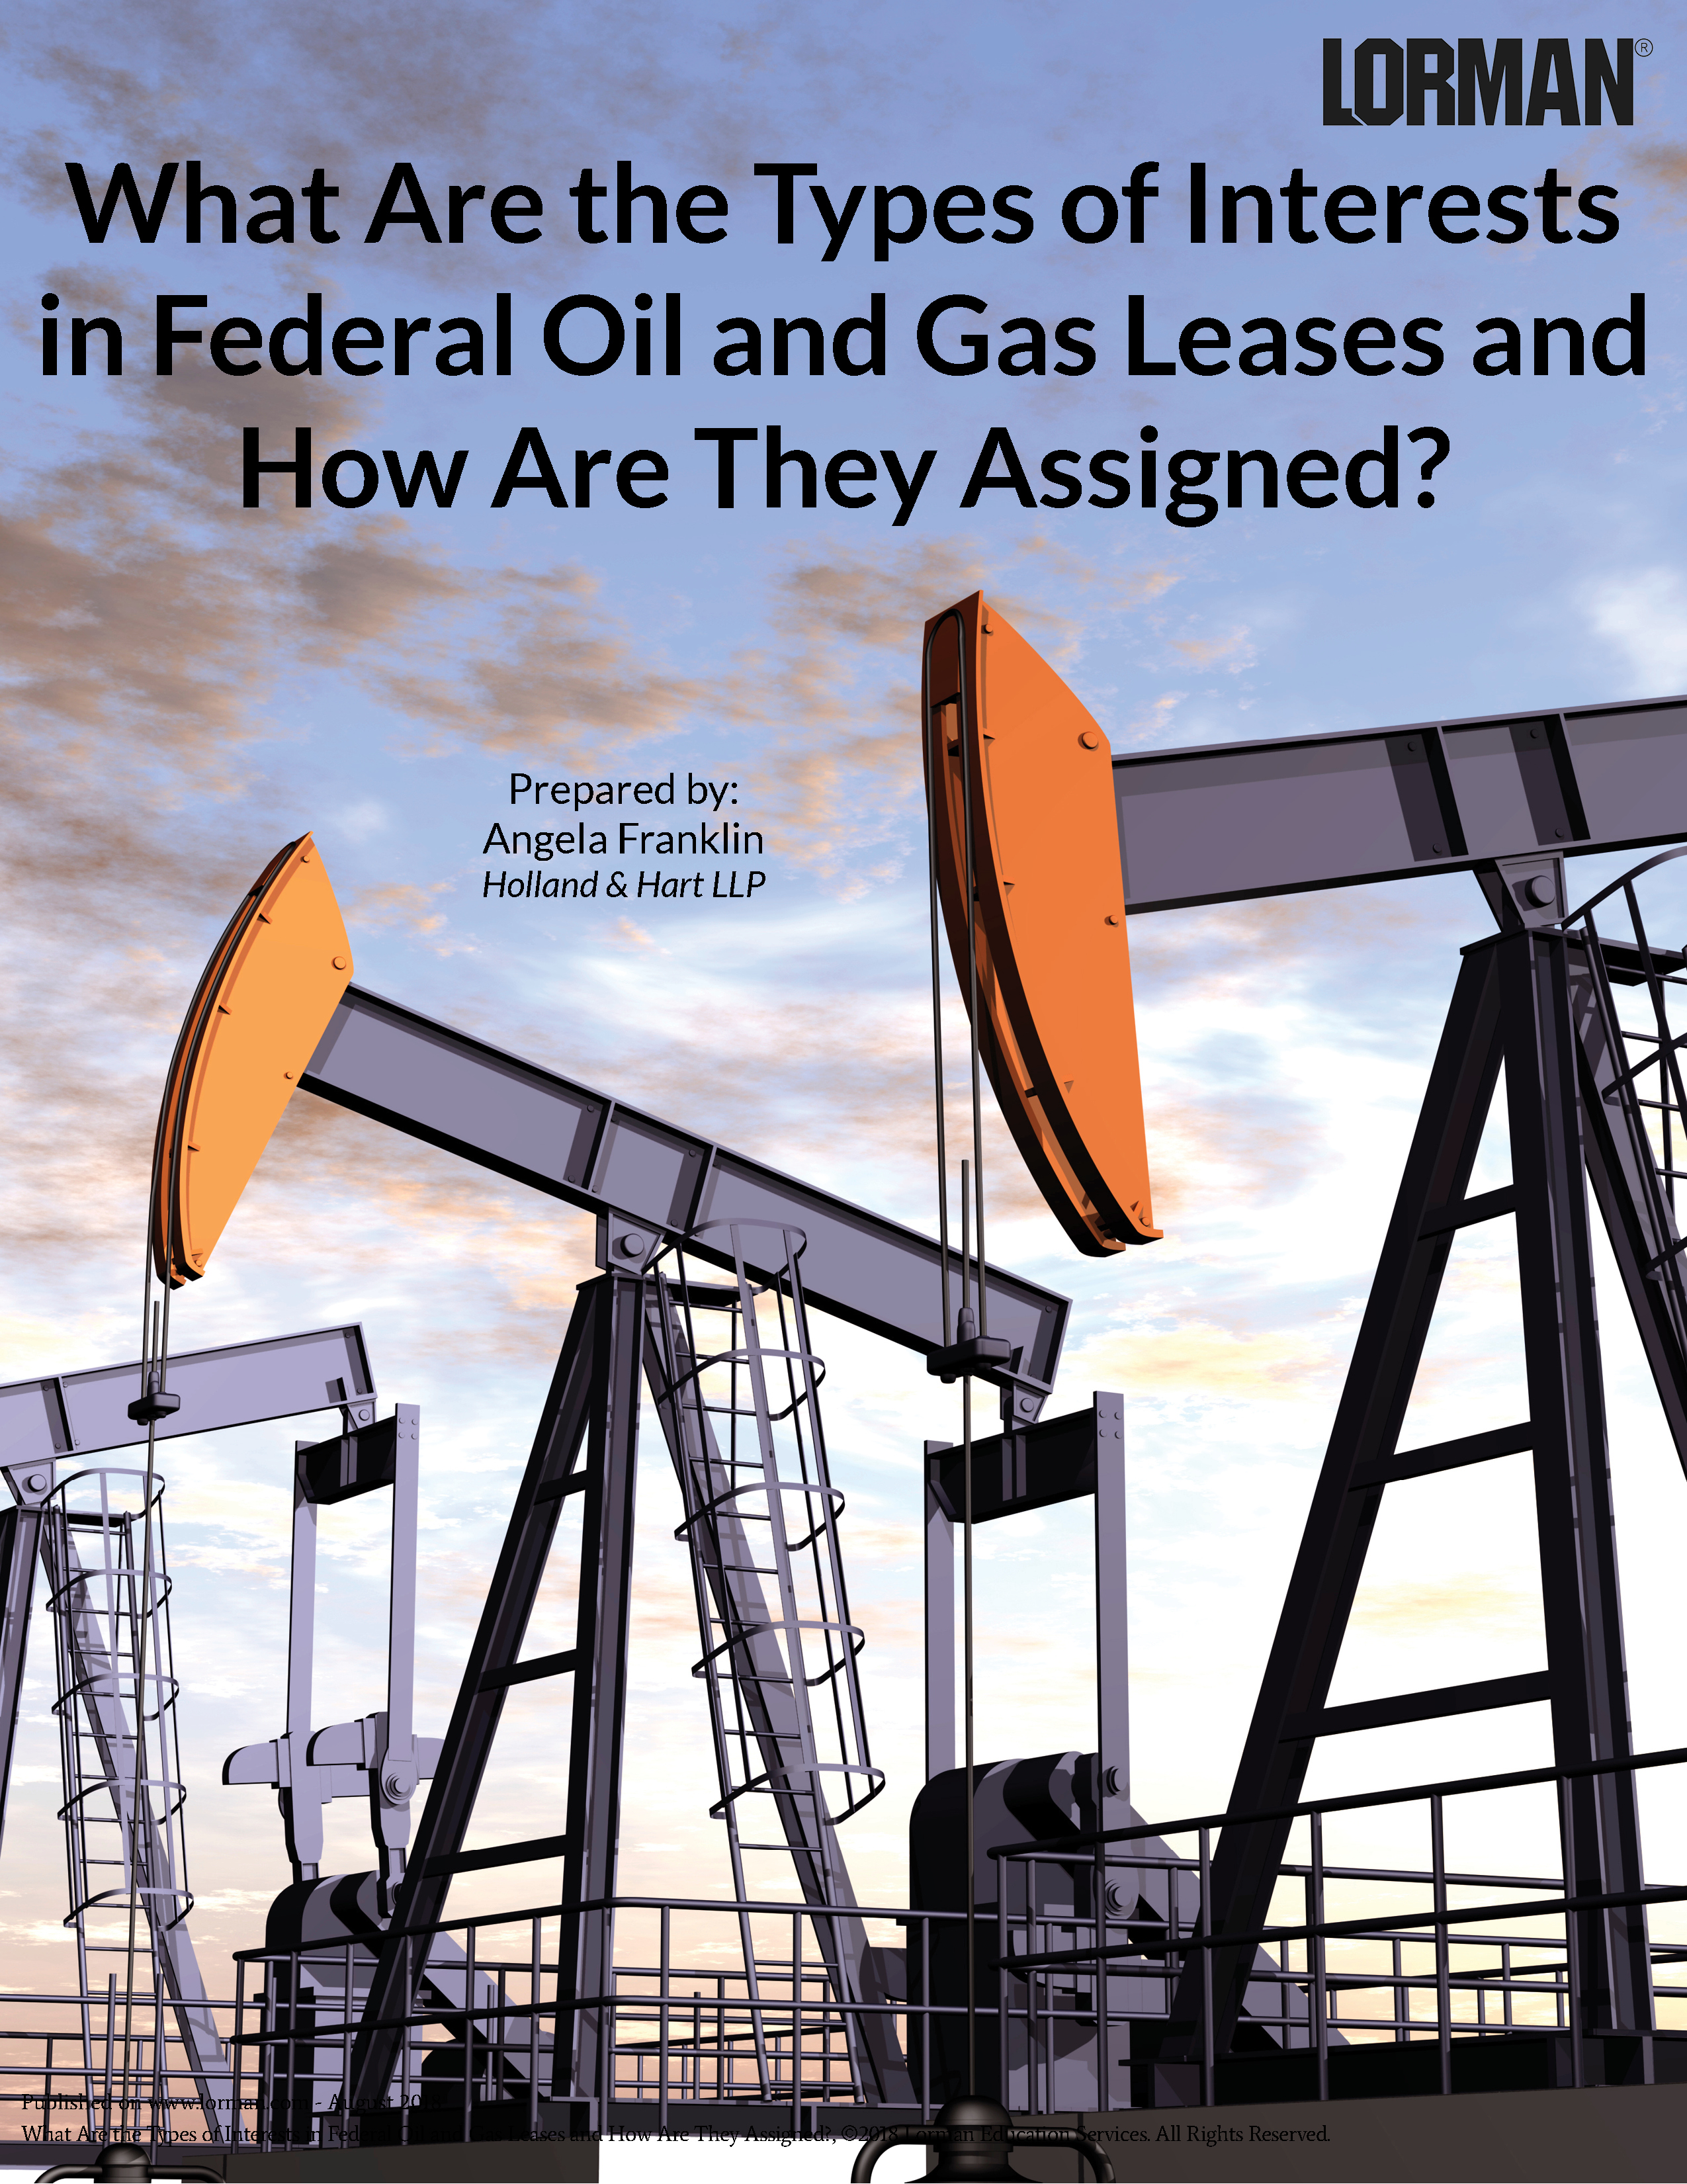 What Are the Types of Interests in Federal Oil and Gas Leases and How Are They Assigned? 